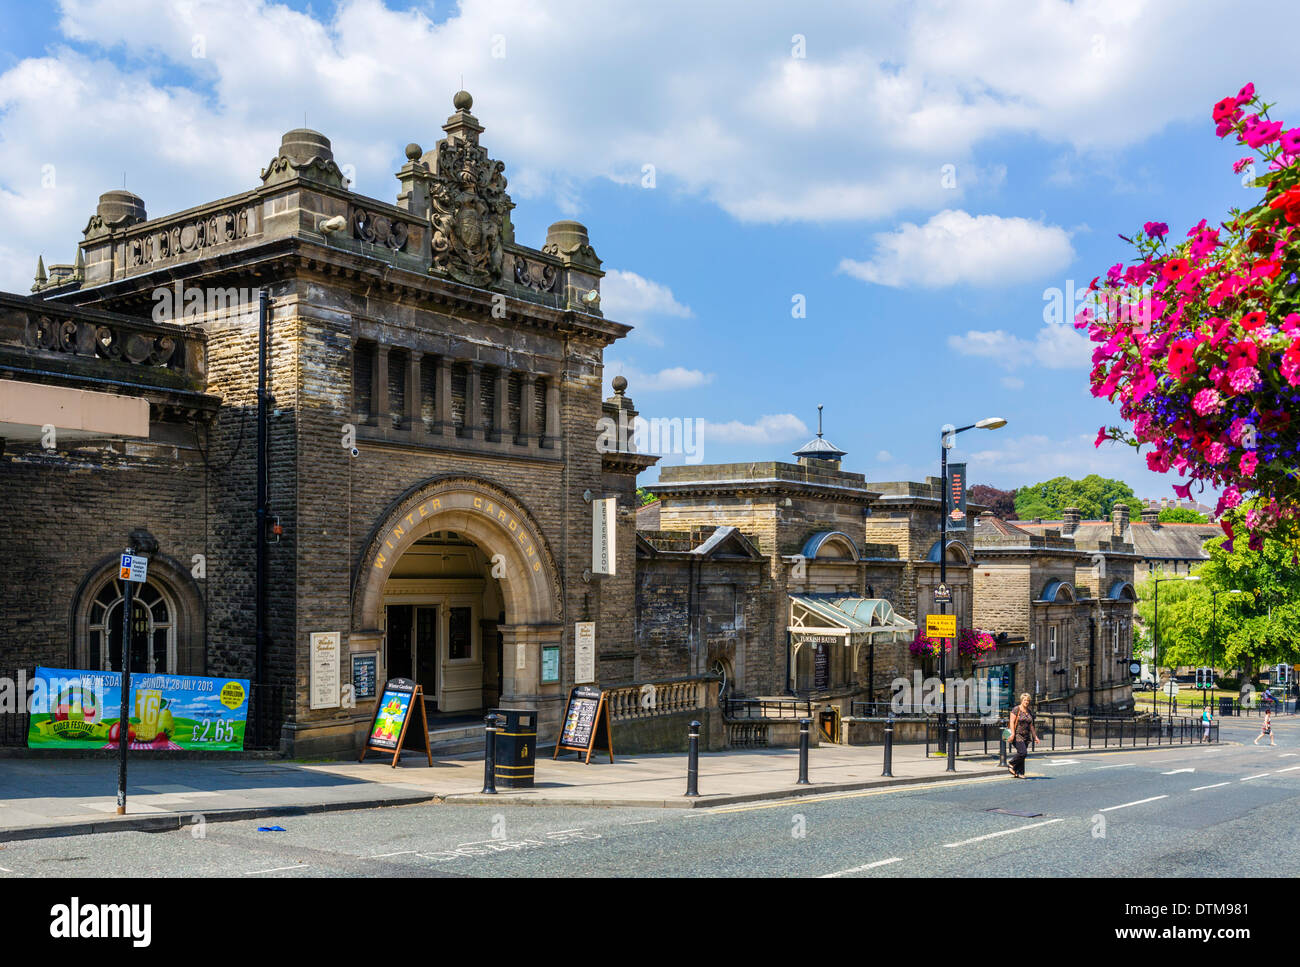 The Winter Gardens, now a Wetherspoons pub, Harrogate, North Yorkshire, England, UK Stock Photo